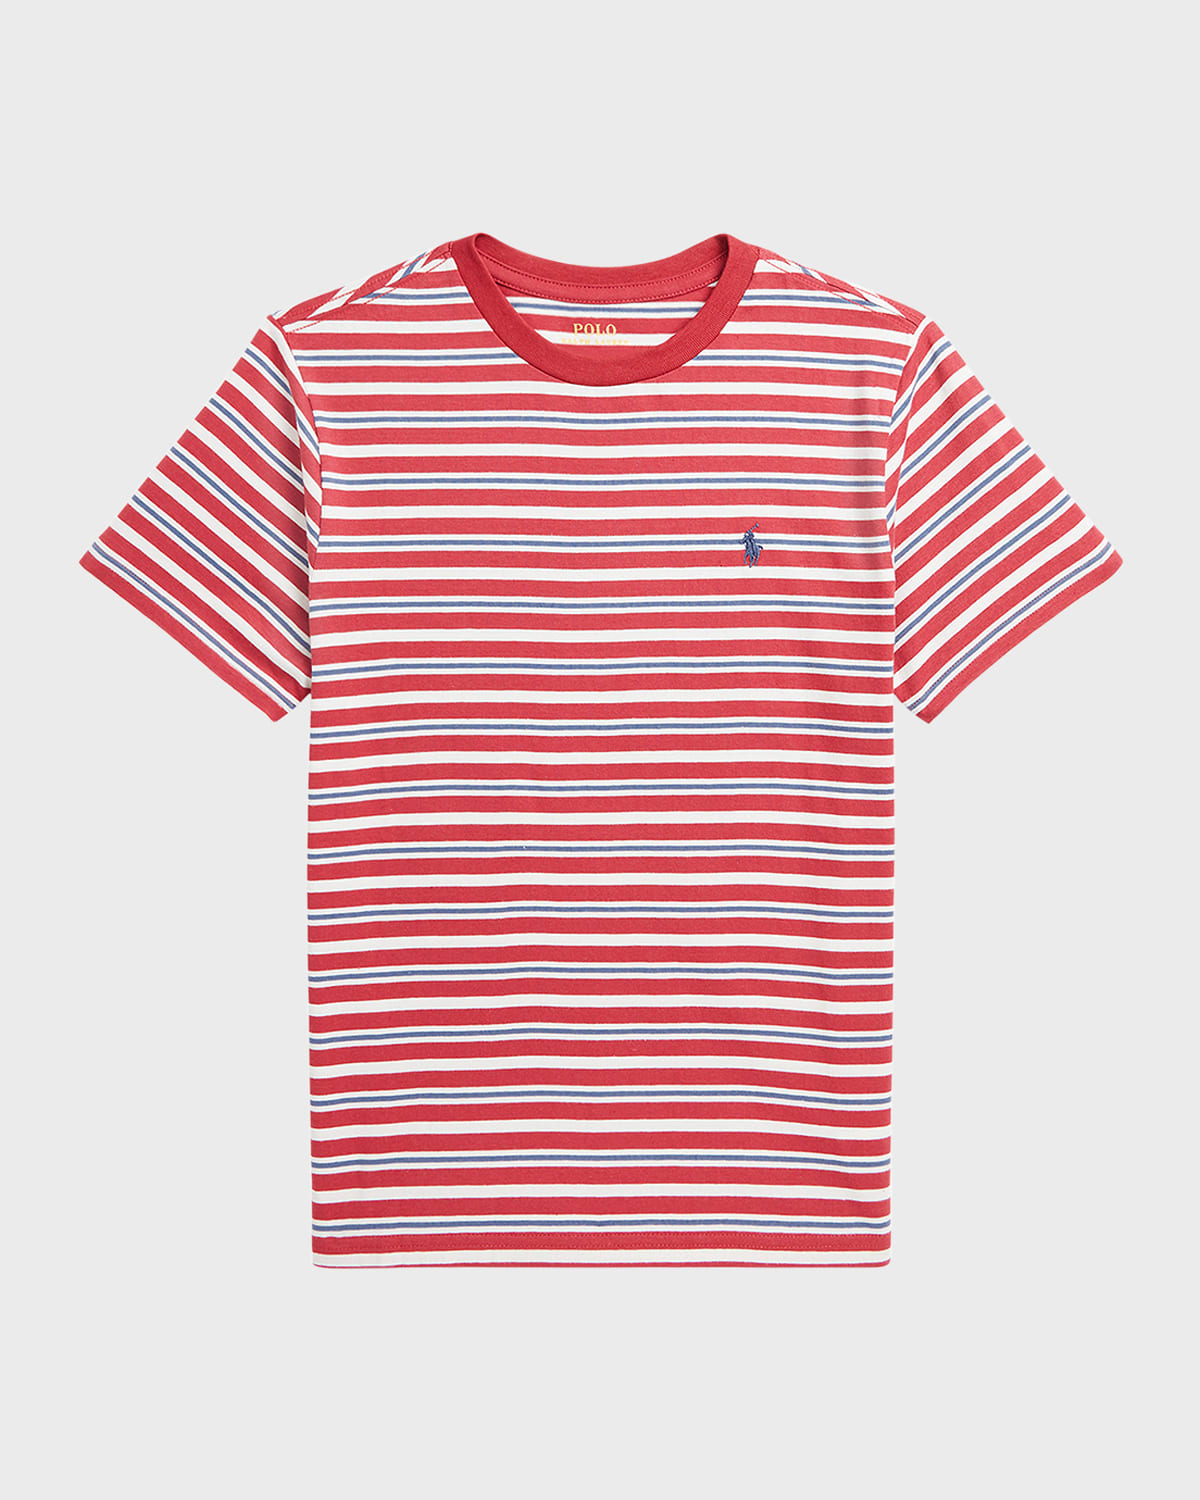 Boy's Striped Embroidered Pony T-Shirt, Size S-XL